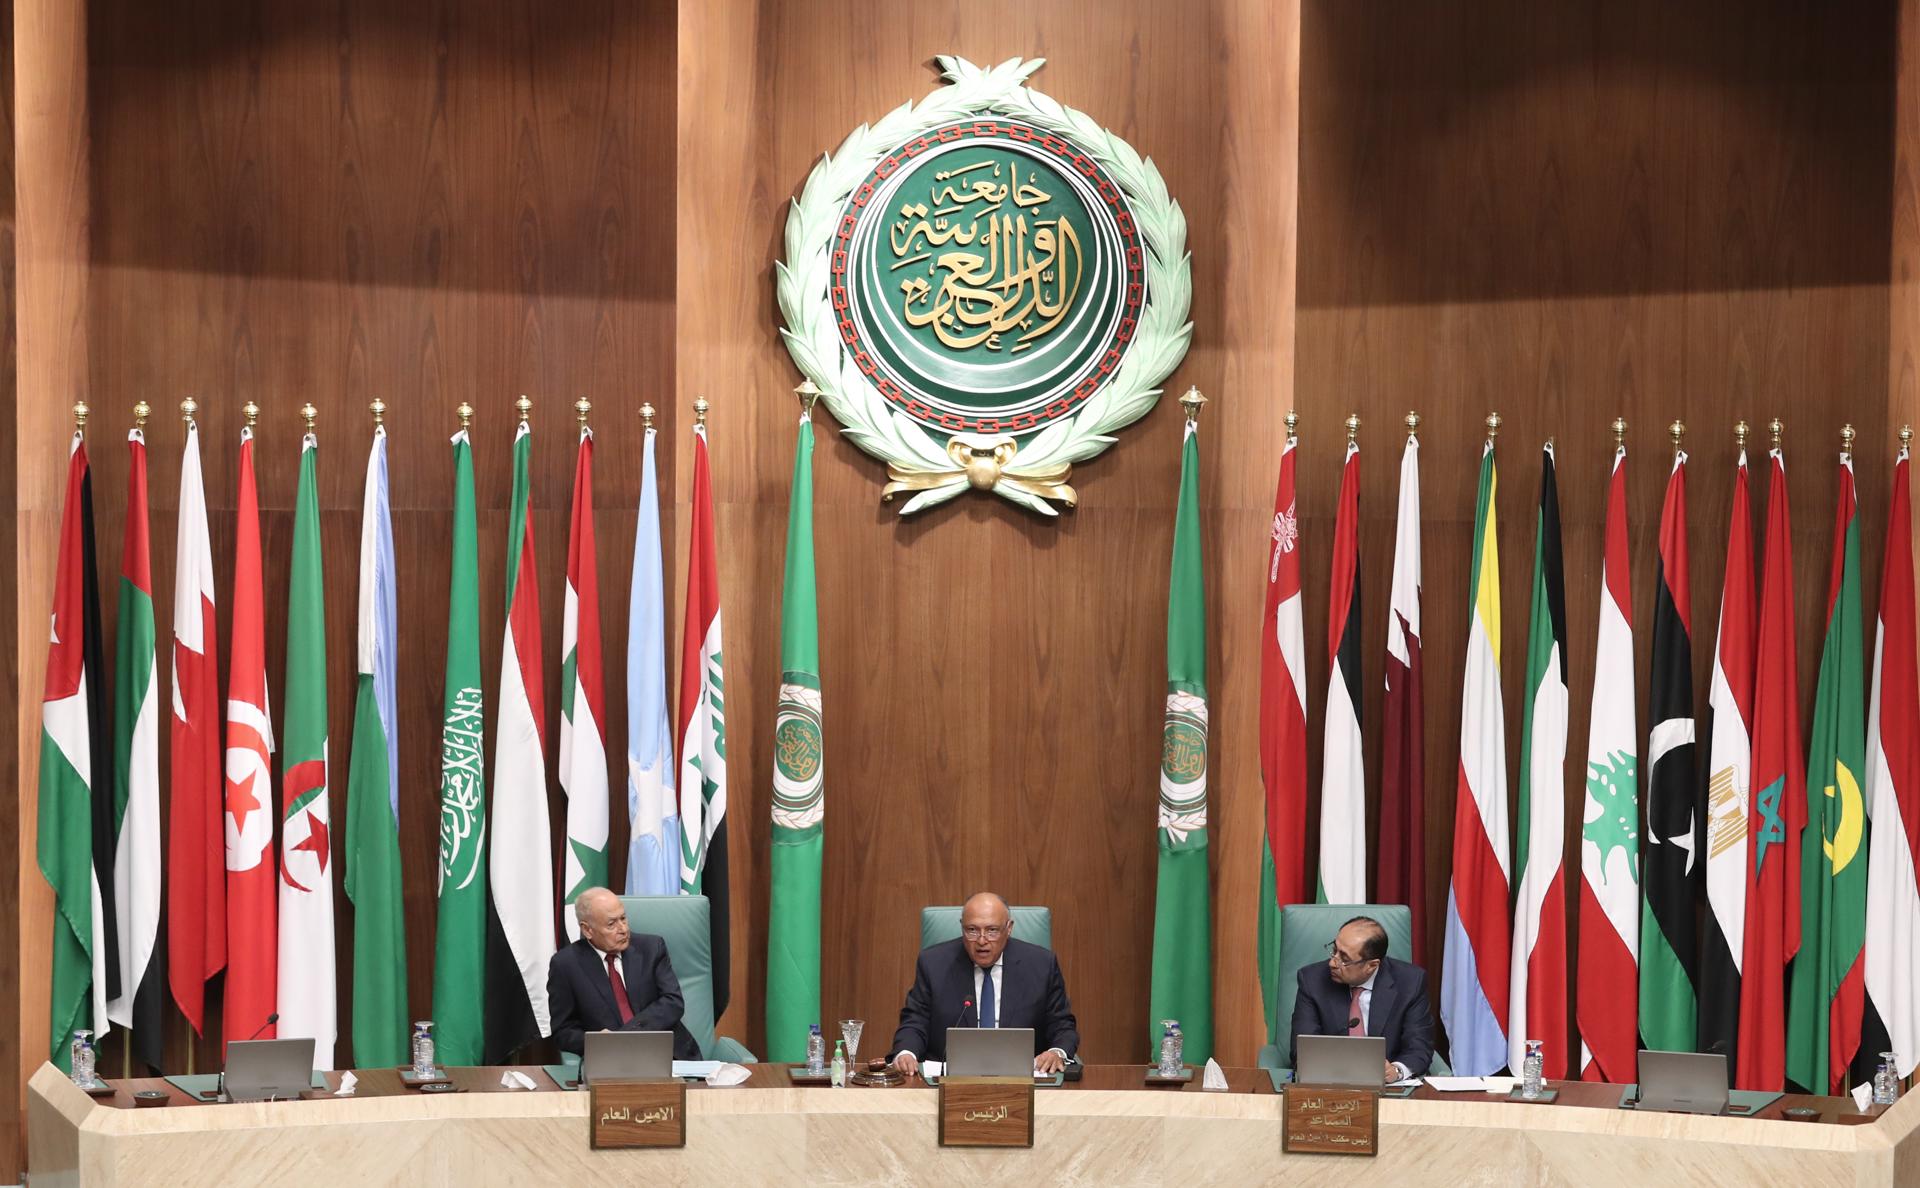 Egyptian Foreign Minister Sameh Shoukry (C), Secretary-General of the Arab League Ahmed Aboul Gheit (L), and Assistant Secretary General responsible of the League's Council, Assistant Secretary-General of the Arab League Hossam Zaki (R) attend the emergency meeting of Arab League foreign ministers, in Cairo, Egypt, 07 May 2023. EFE/EPA/KHALED ELFIQI